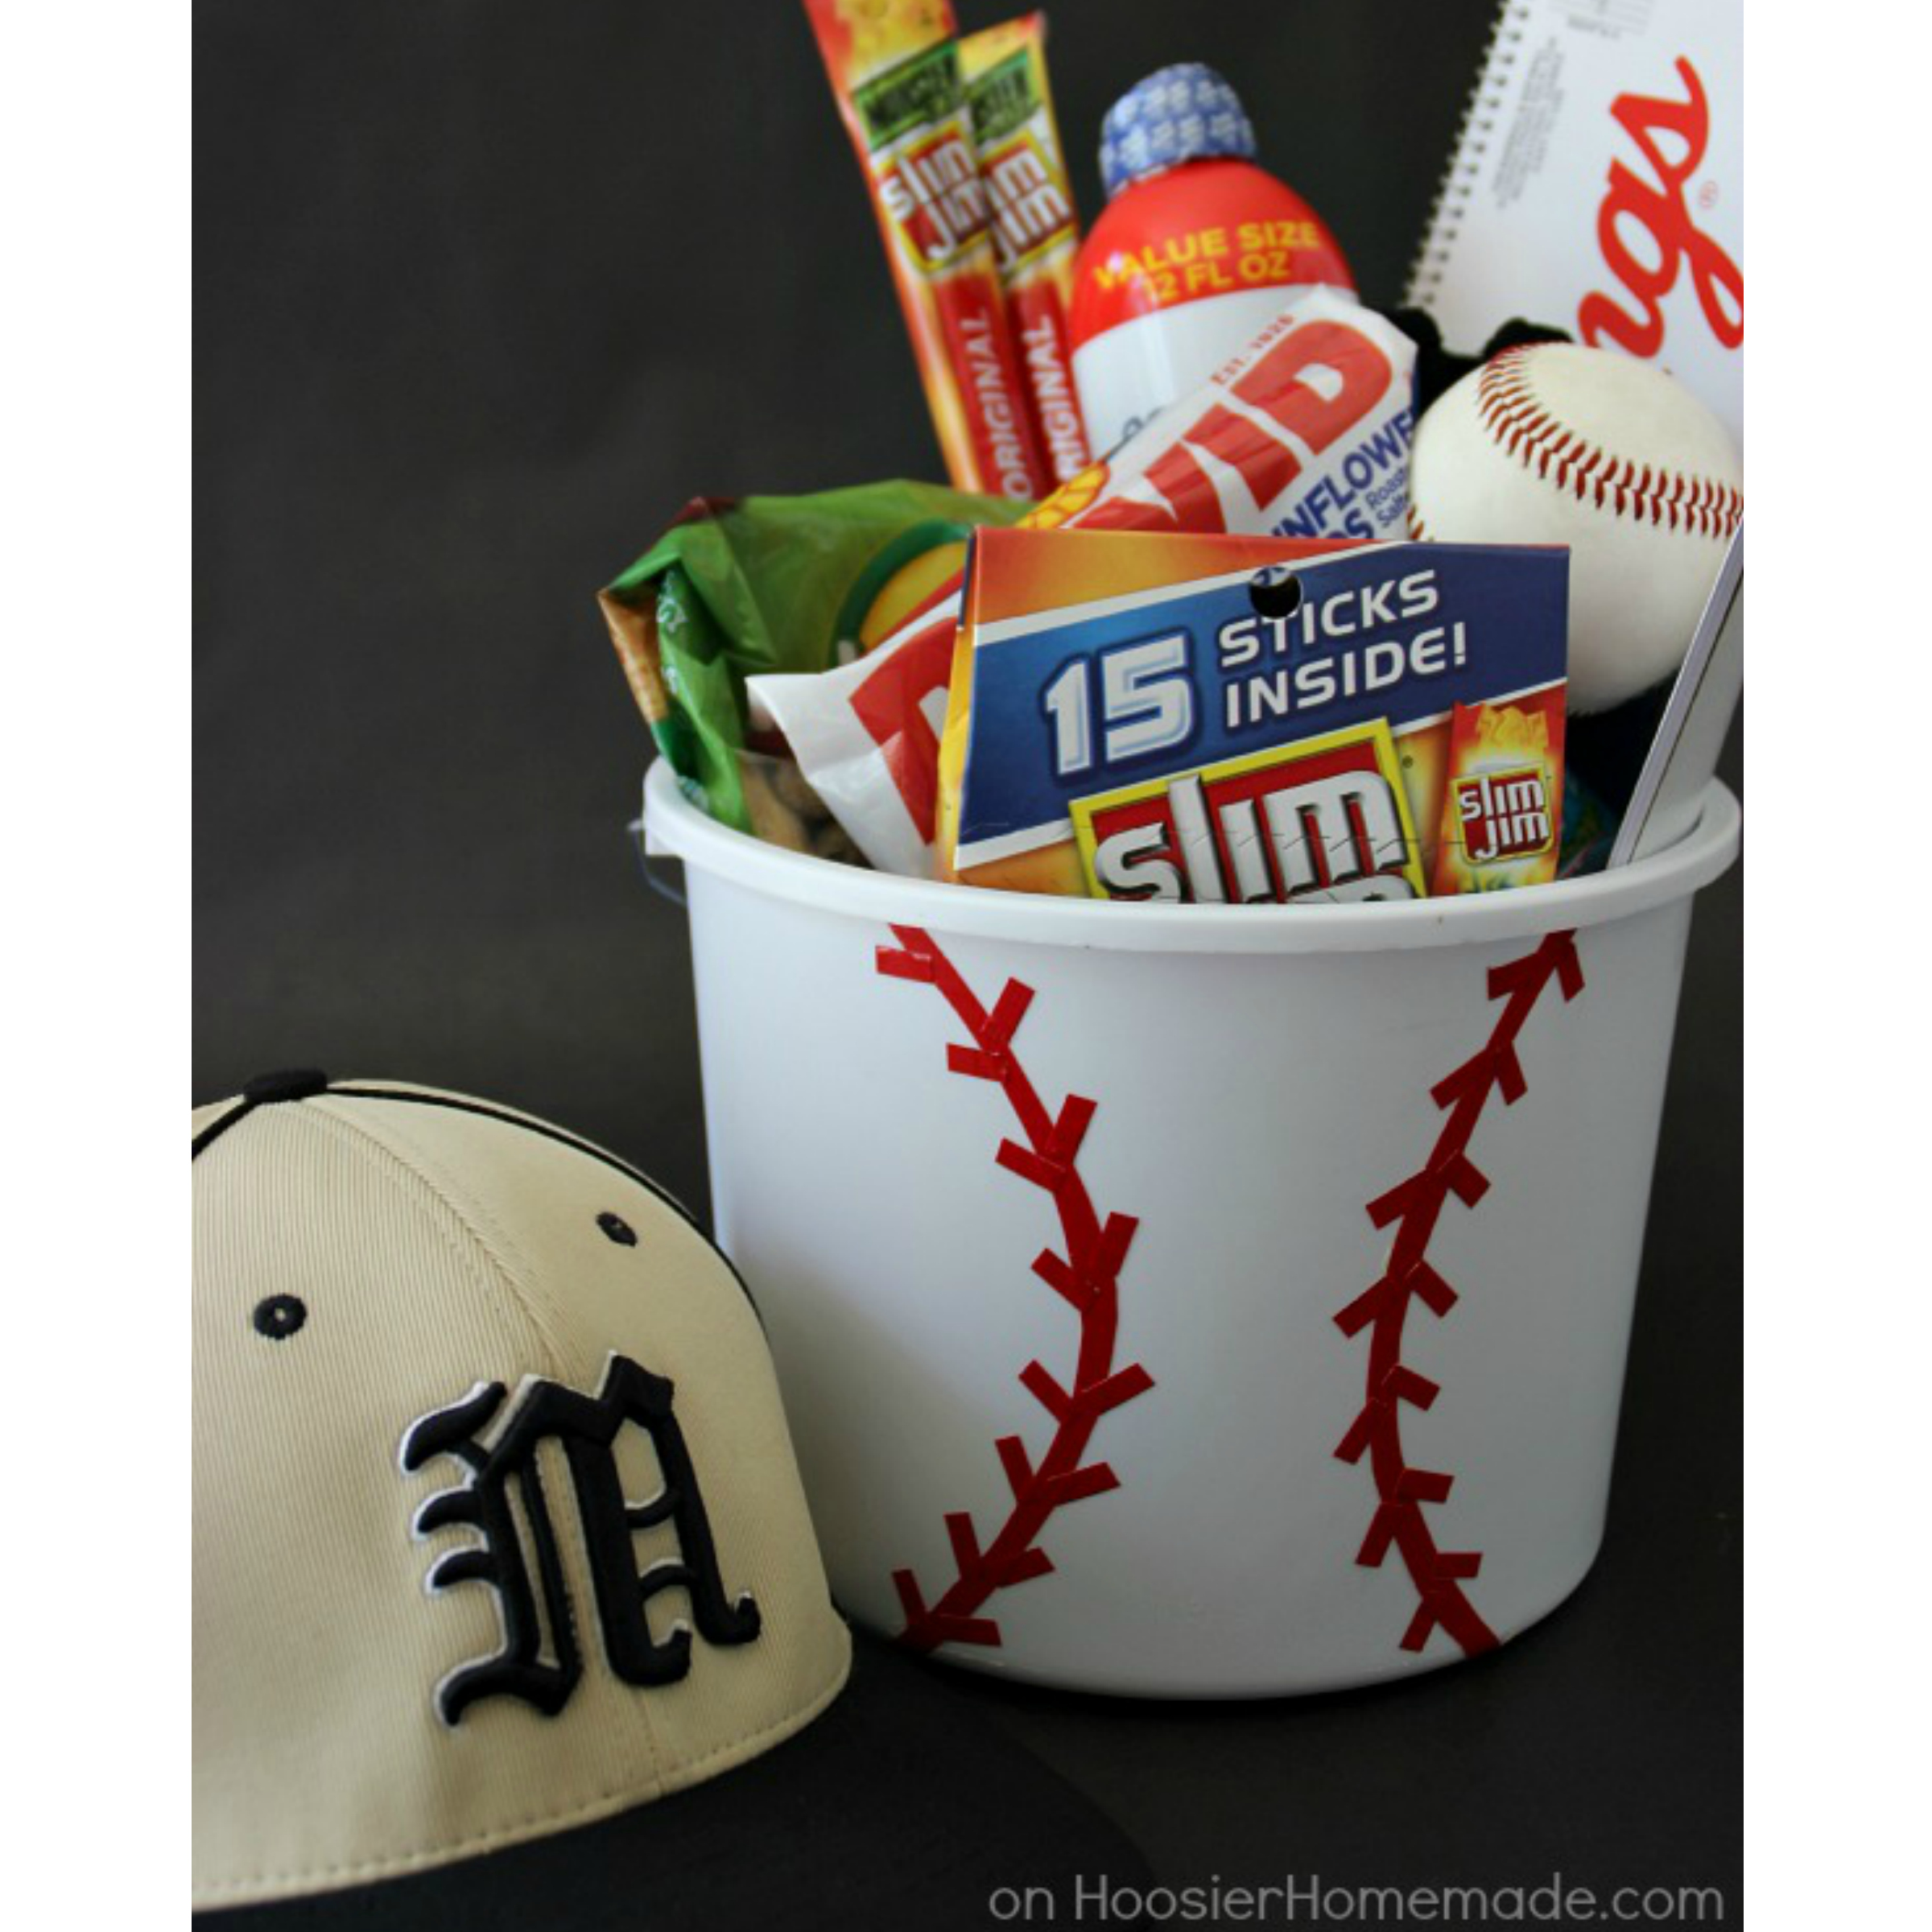 How to make gift cards more special: Create a DIY sports themed gift card bucket like this one from Hoosier Homemade.